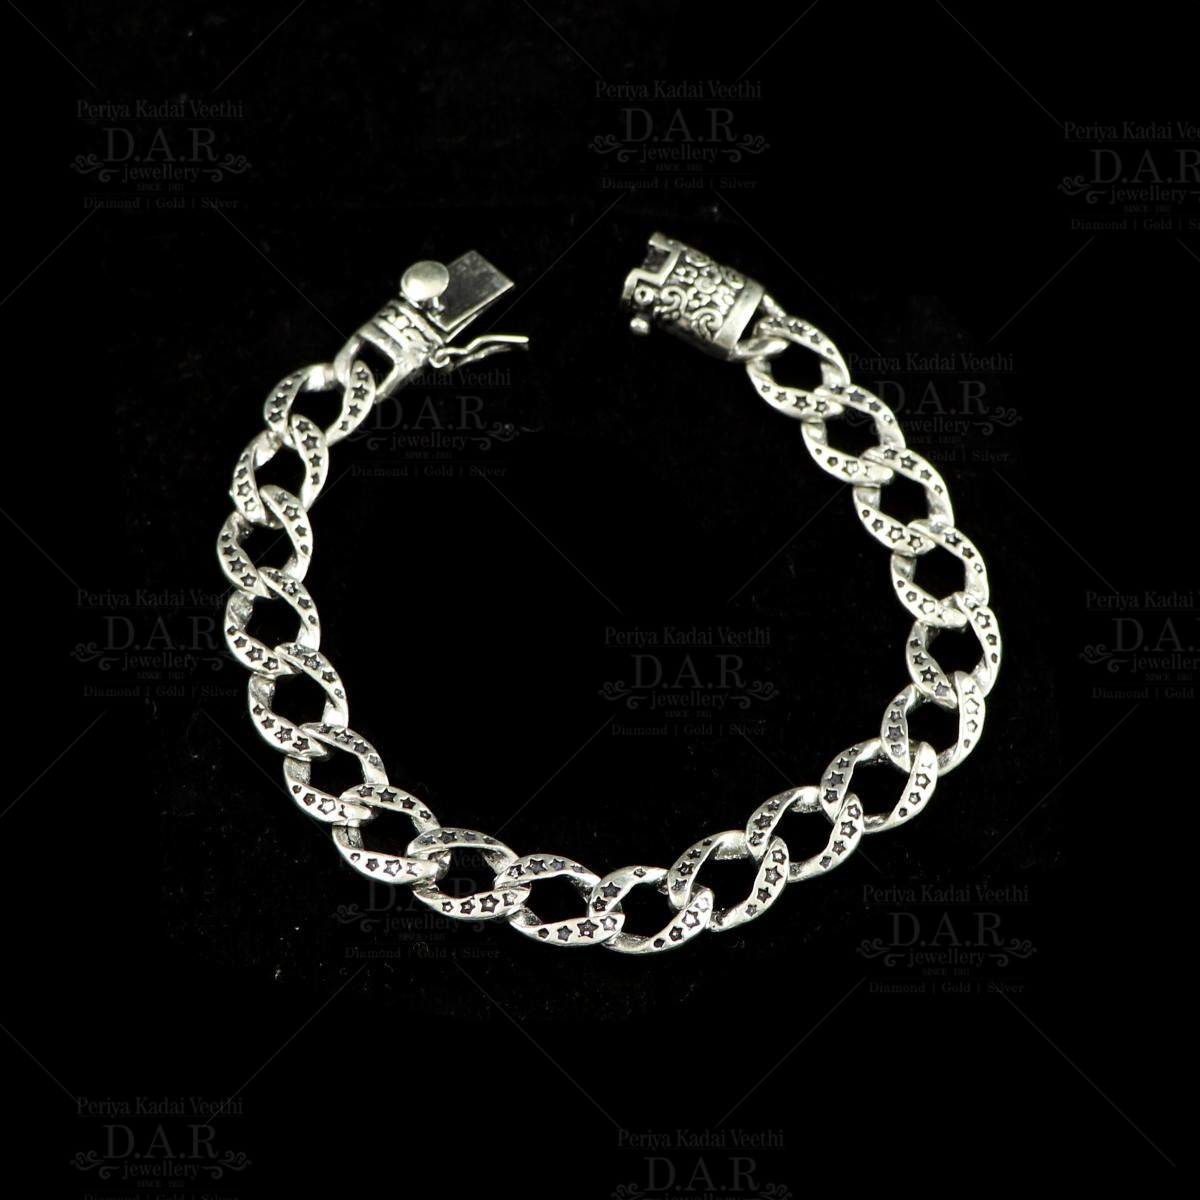 Solid 925 Sterling Silver Mens ID Bracelet **Many Designs to Choose**all  sizes | eBay